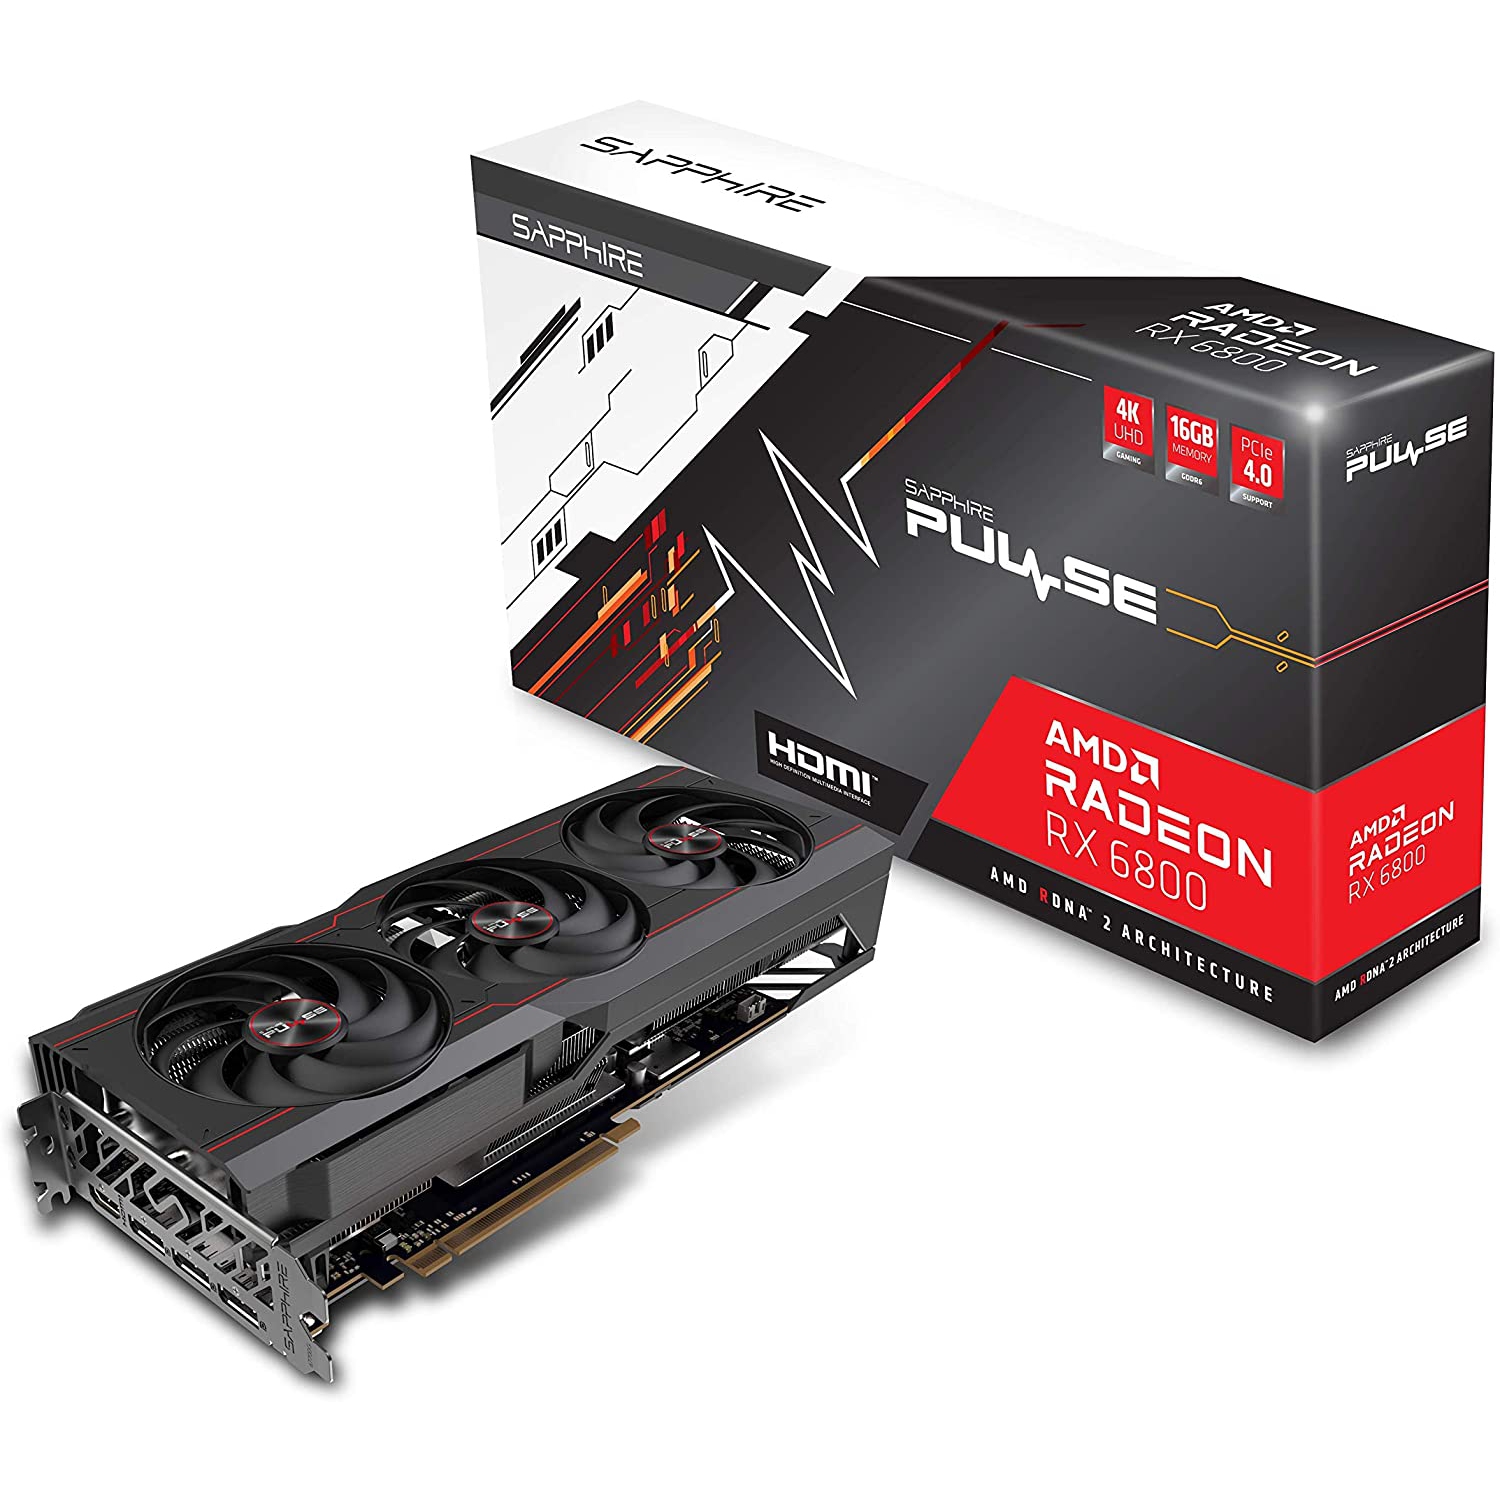 Sapphire Technology Pulse AMD Radeon RX 6800 PCIe 4.0 Gaming Graphics Card with 16GB GDDR6, 11305-02-20G